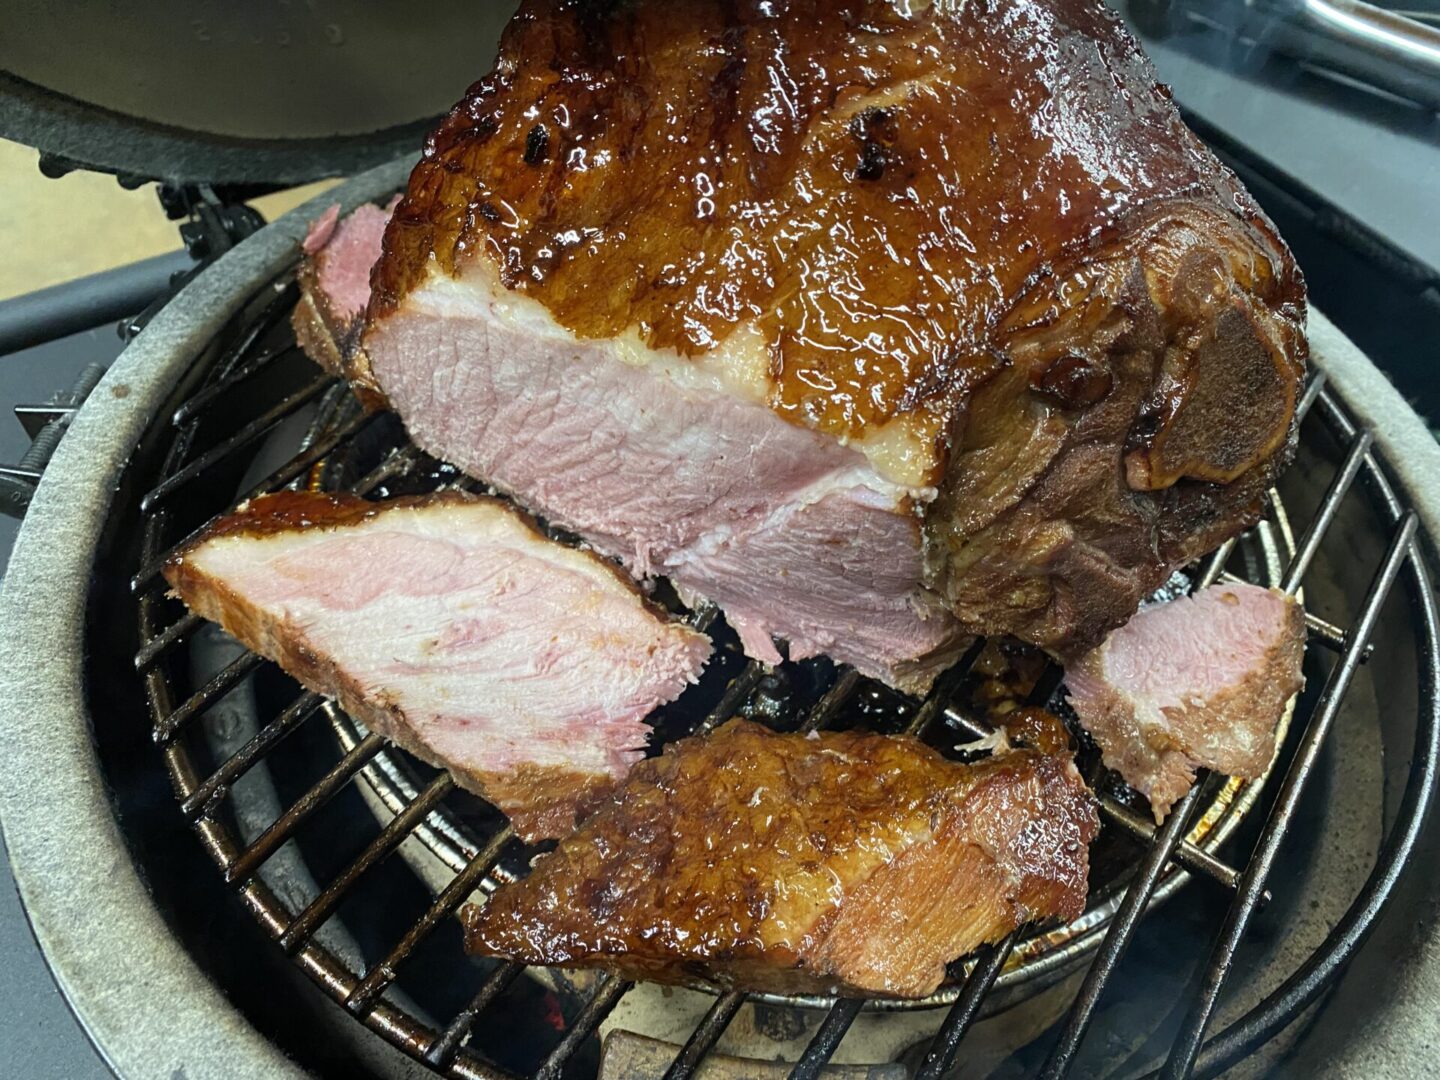 Ham in process of being grilled on one of the tables